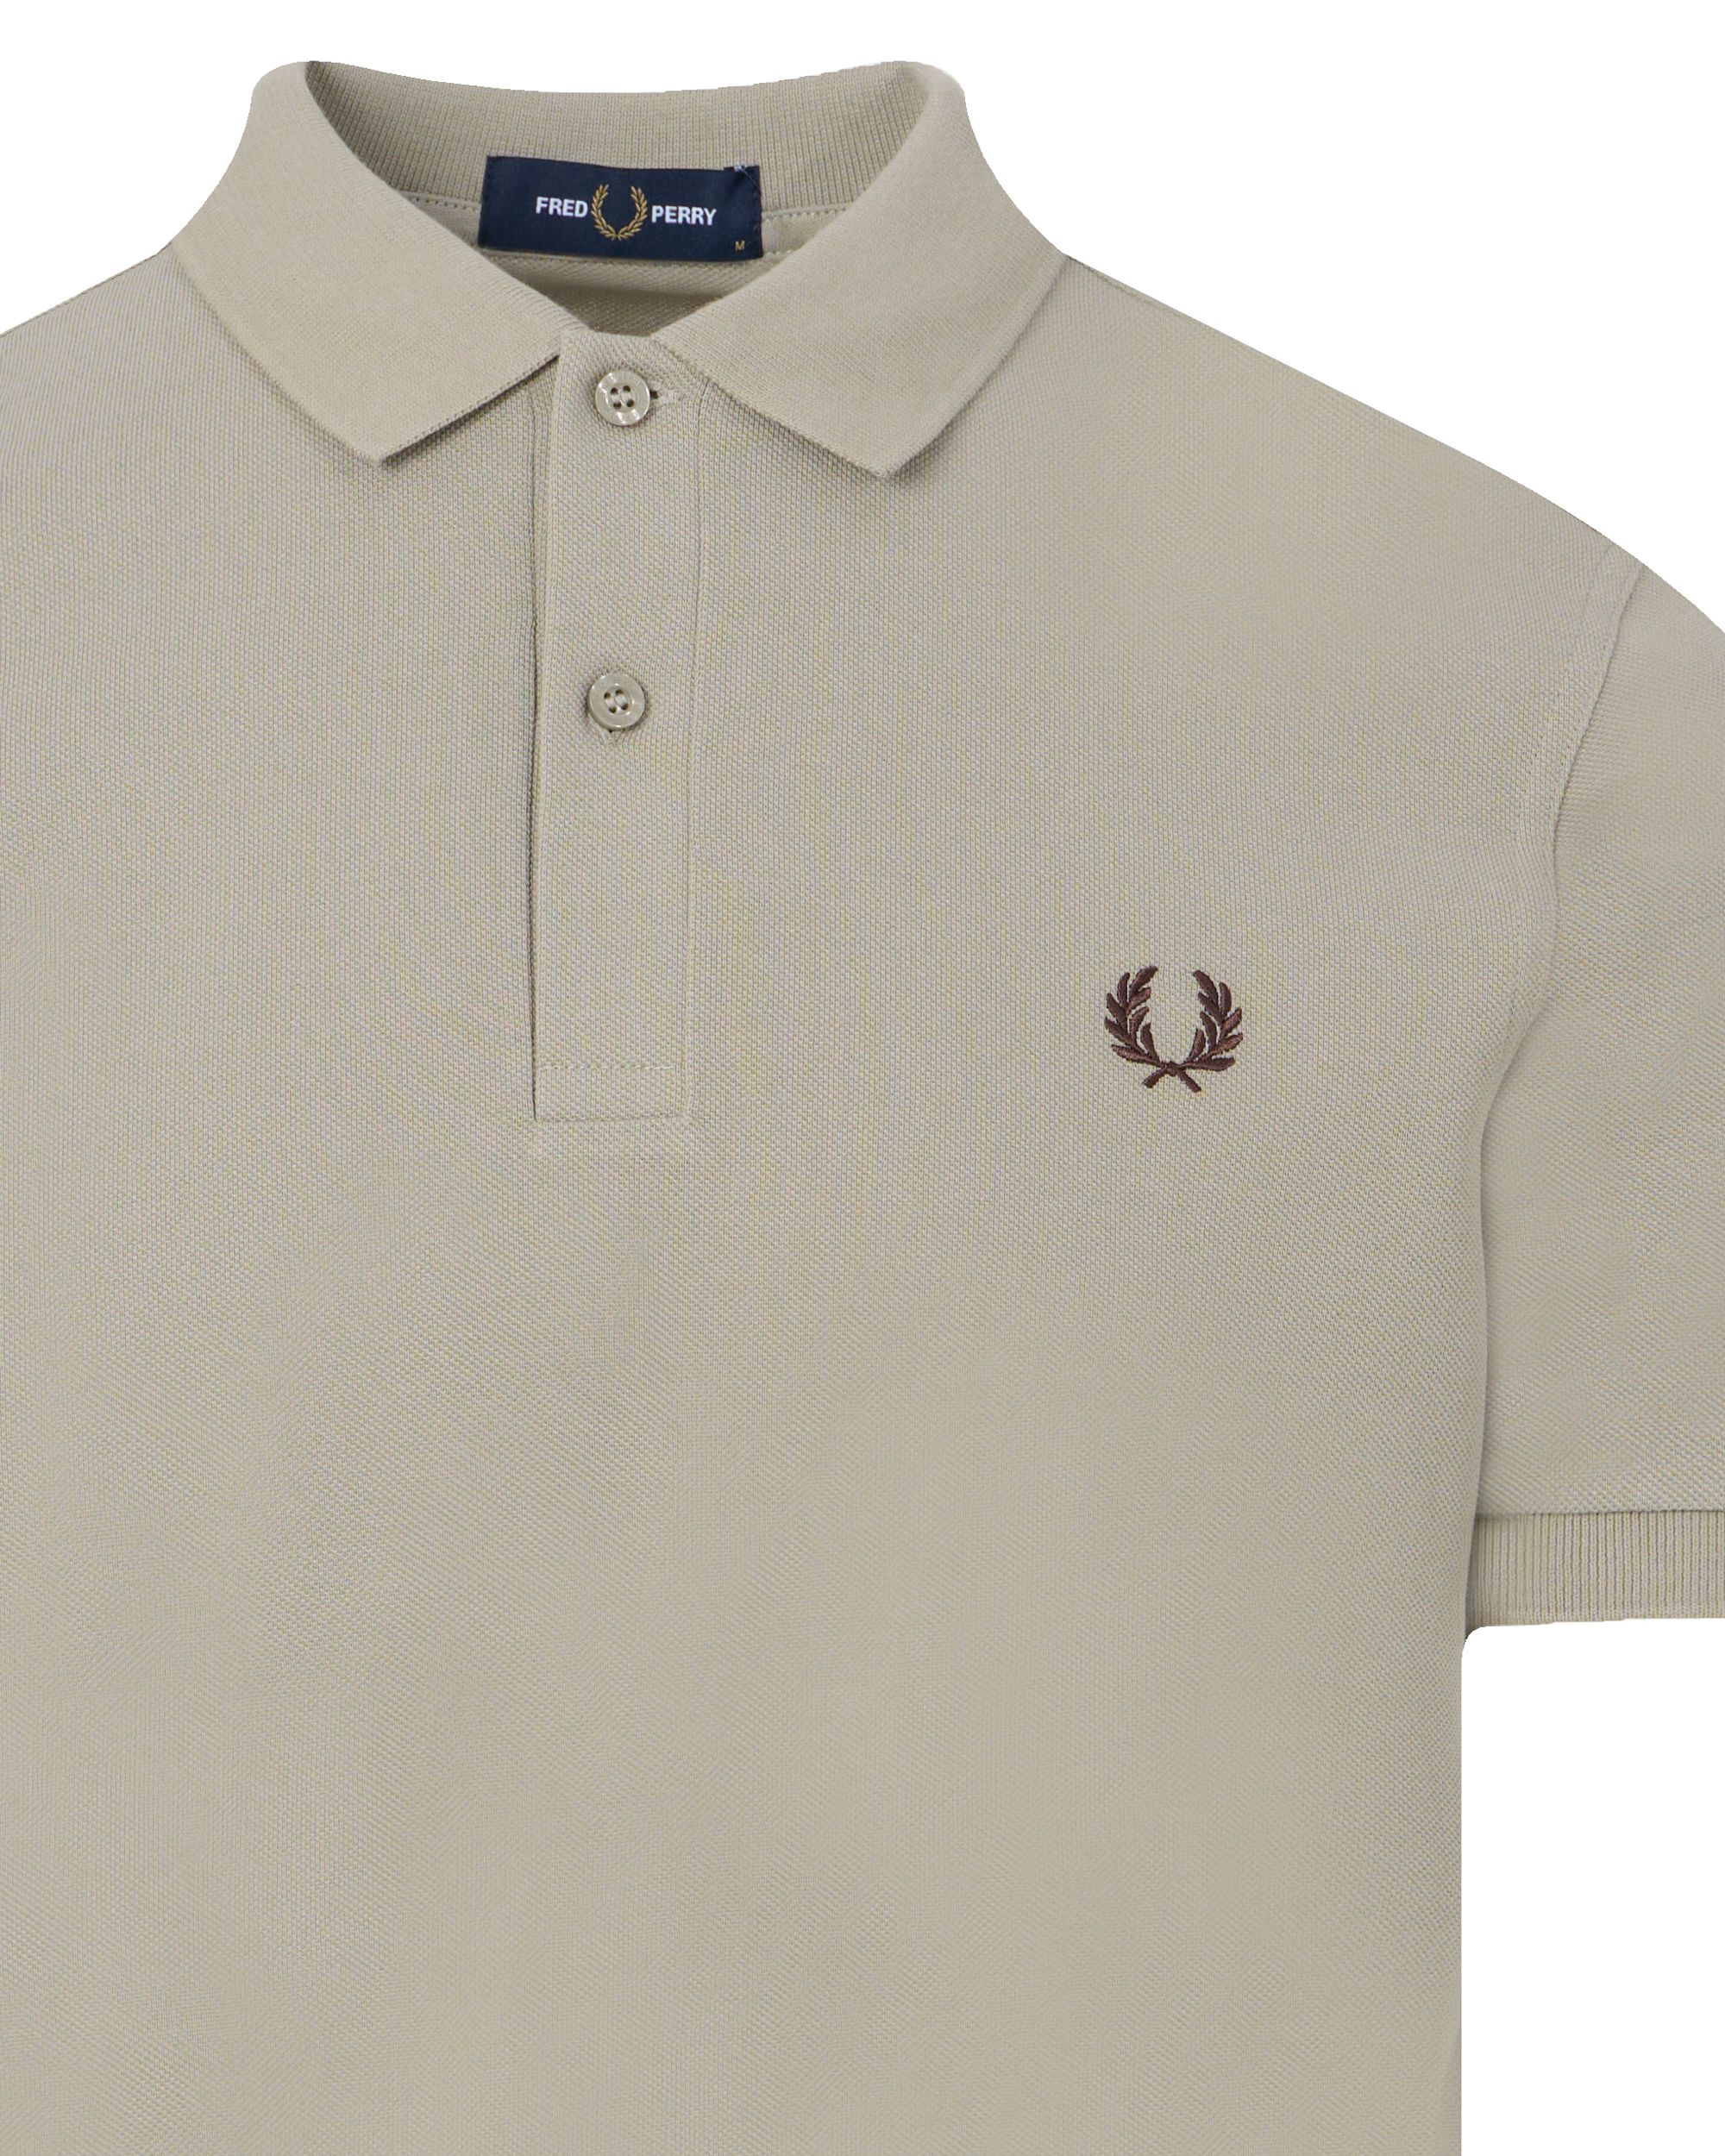 Fred Perry Polo KM Grijs 091959-001-XL